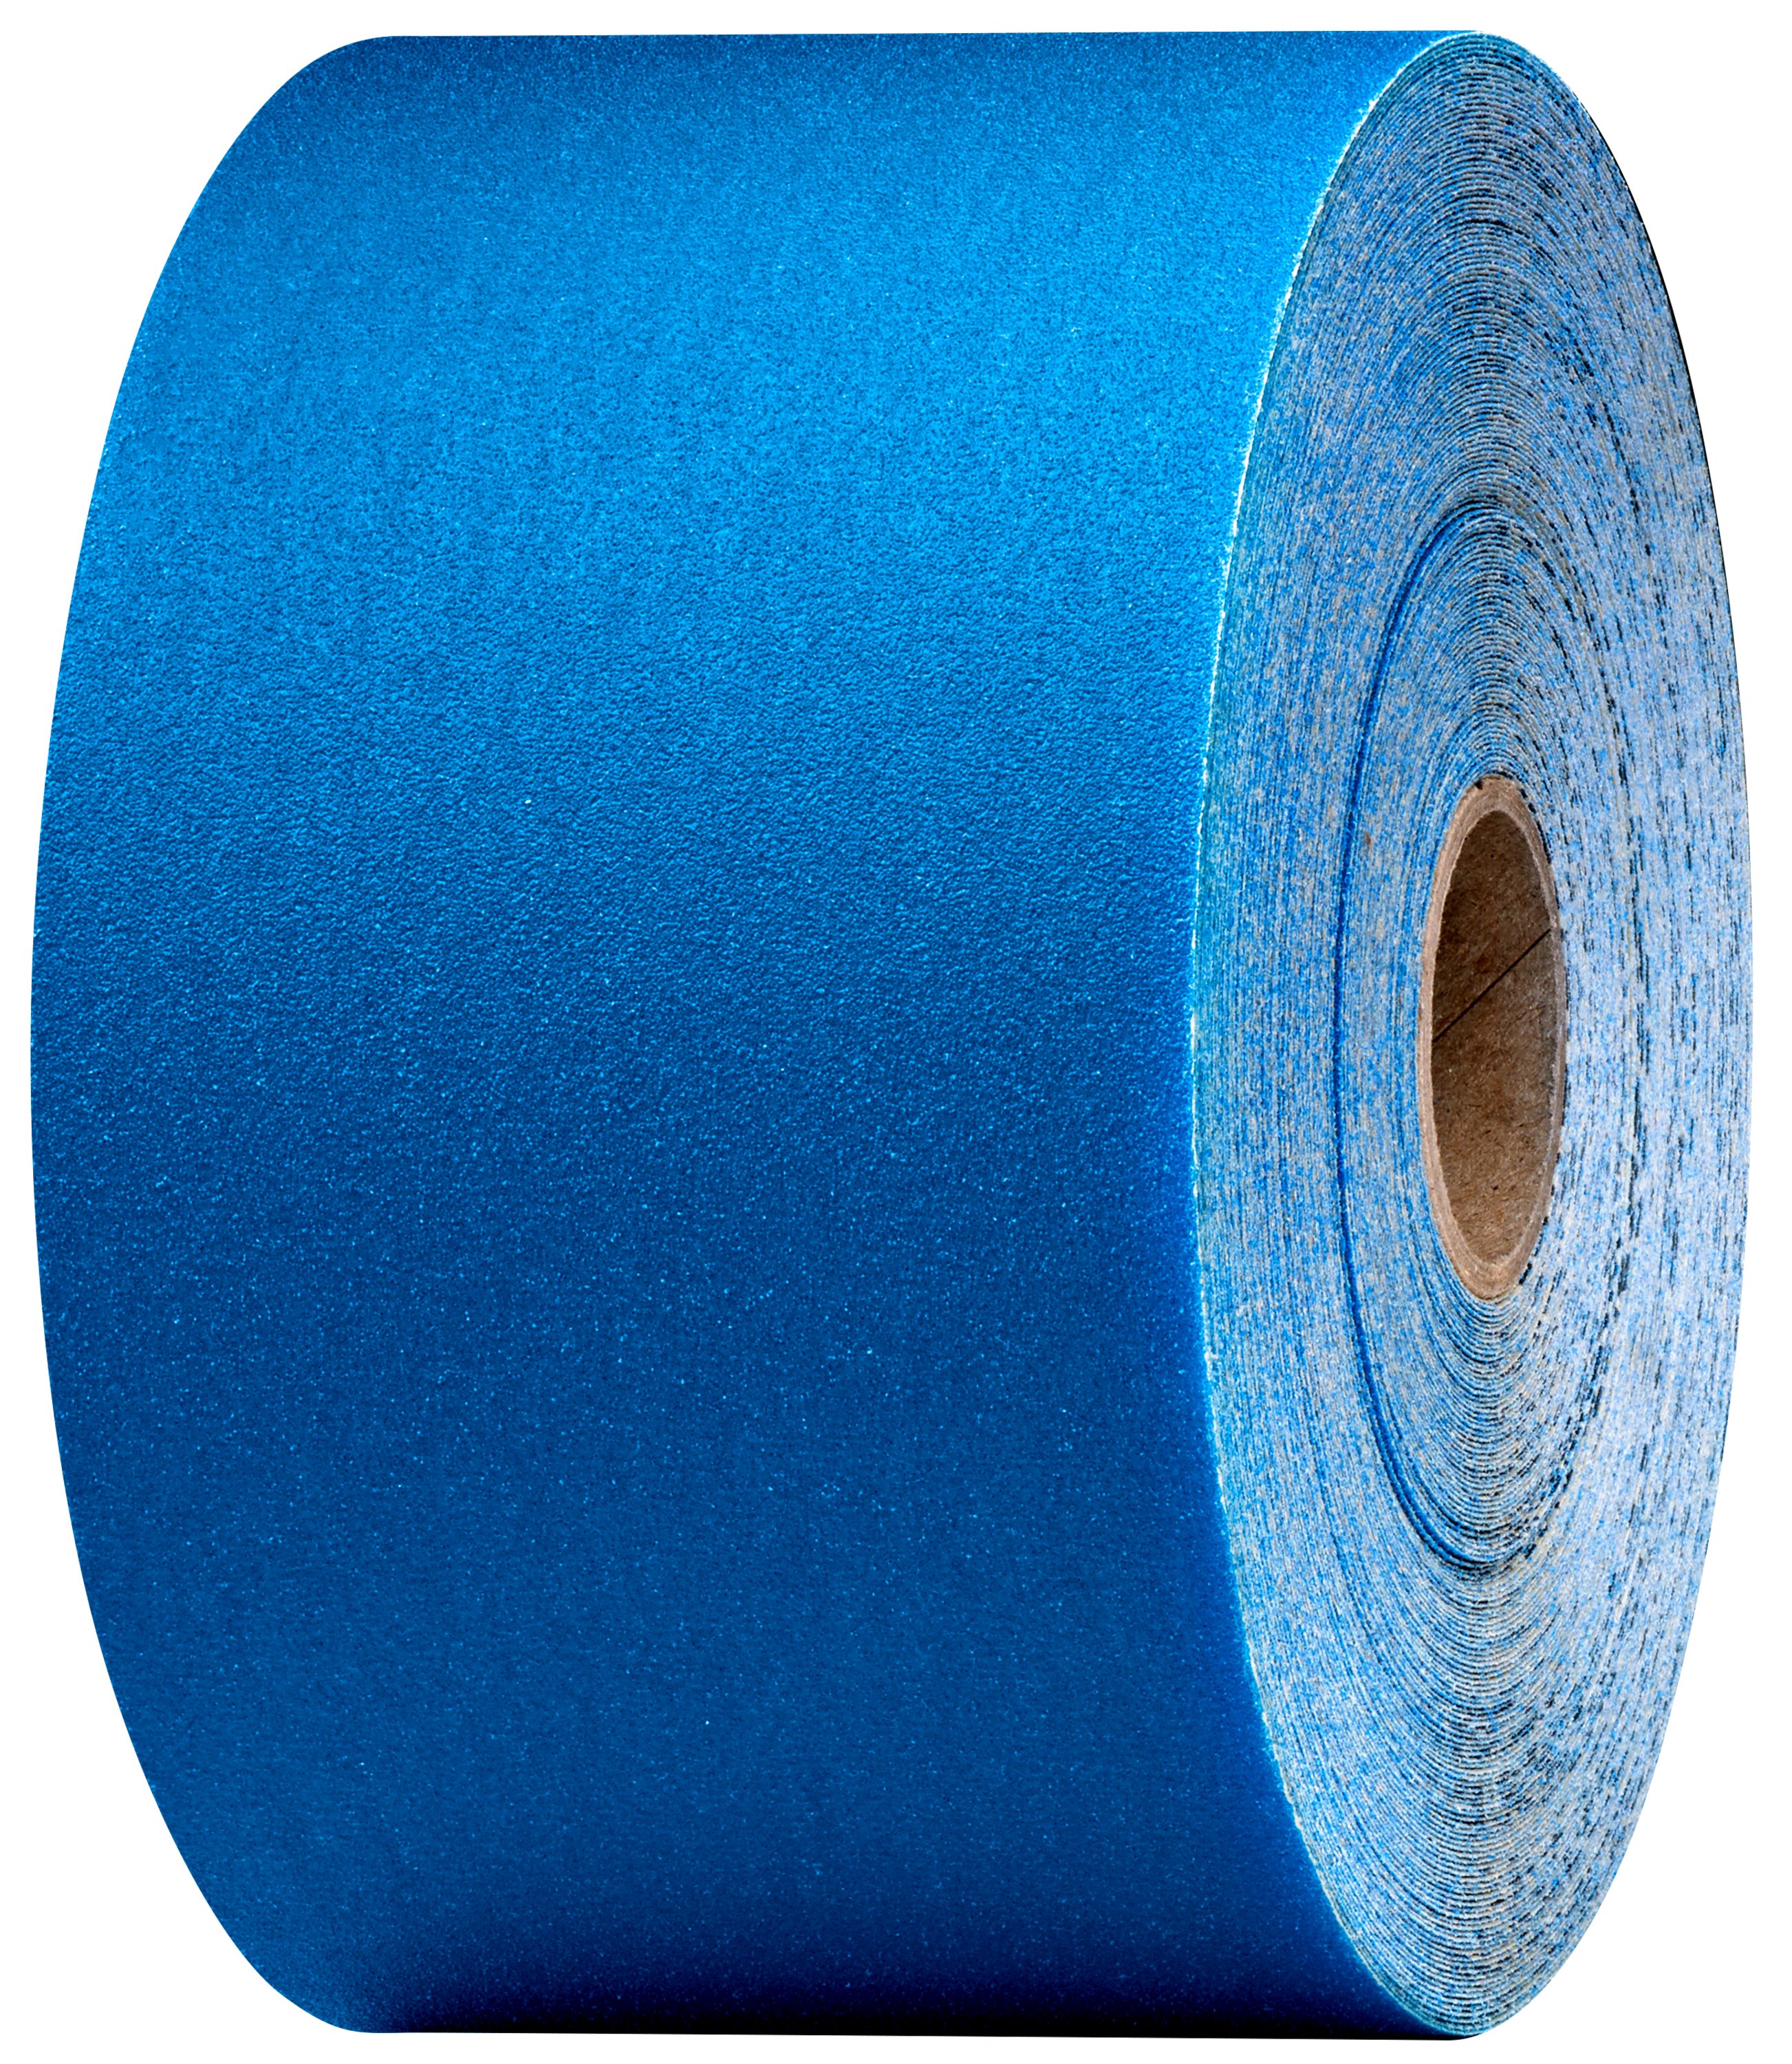 3M™ Stikit™ Blue Abrasive Sheet Rolls is engineered for best-in-class cut, life and efficiency across your entire shop.